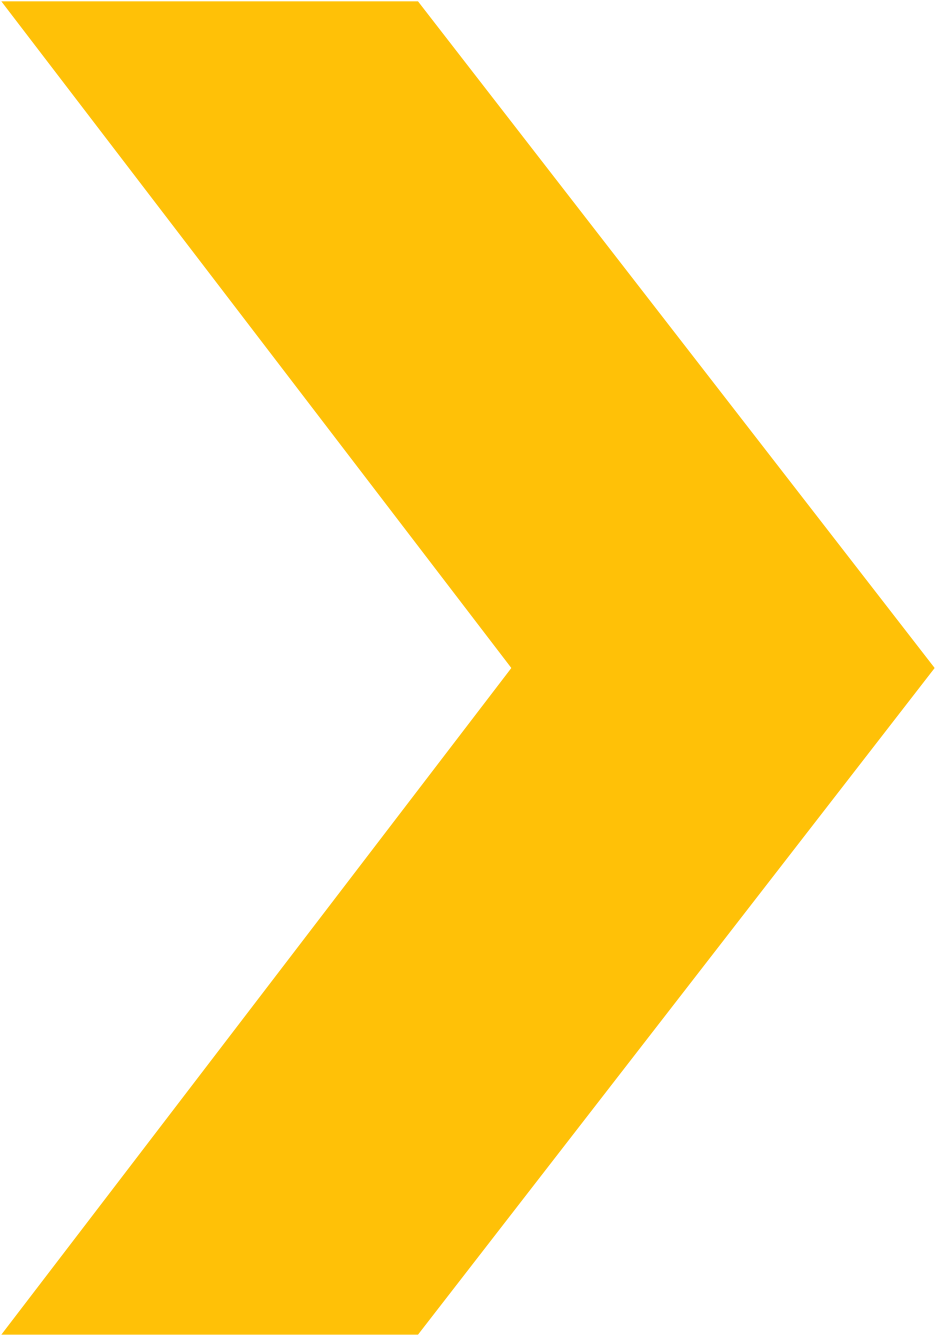 A Yellow Arrow On A Black Background